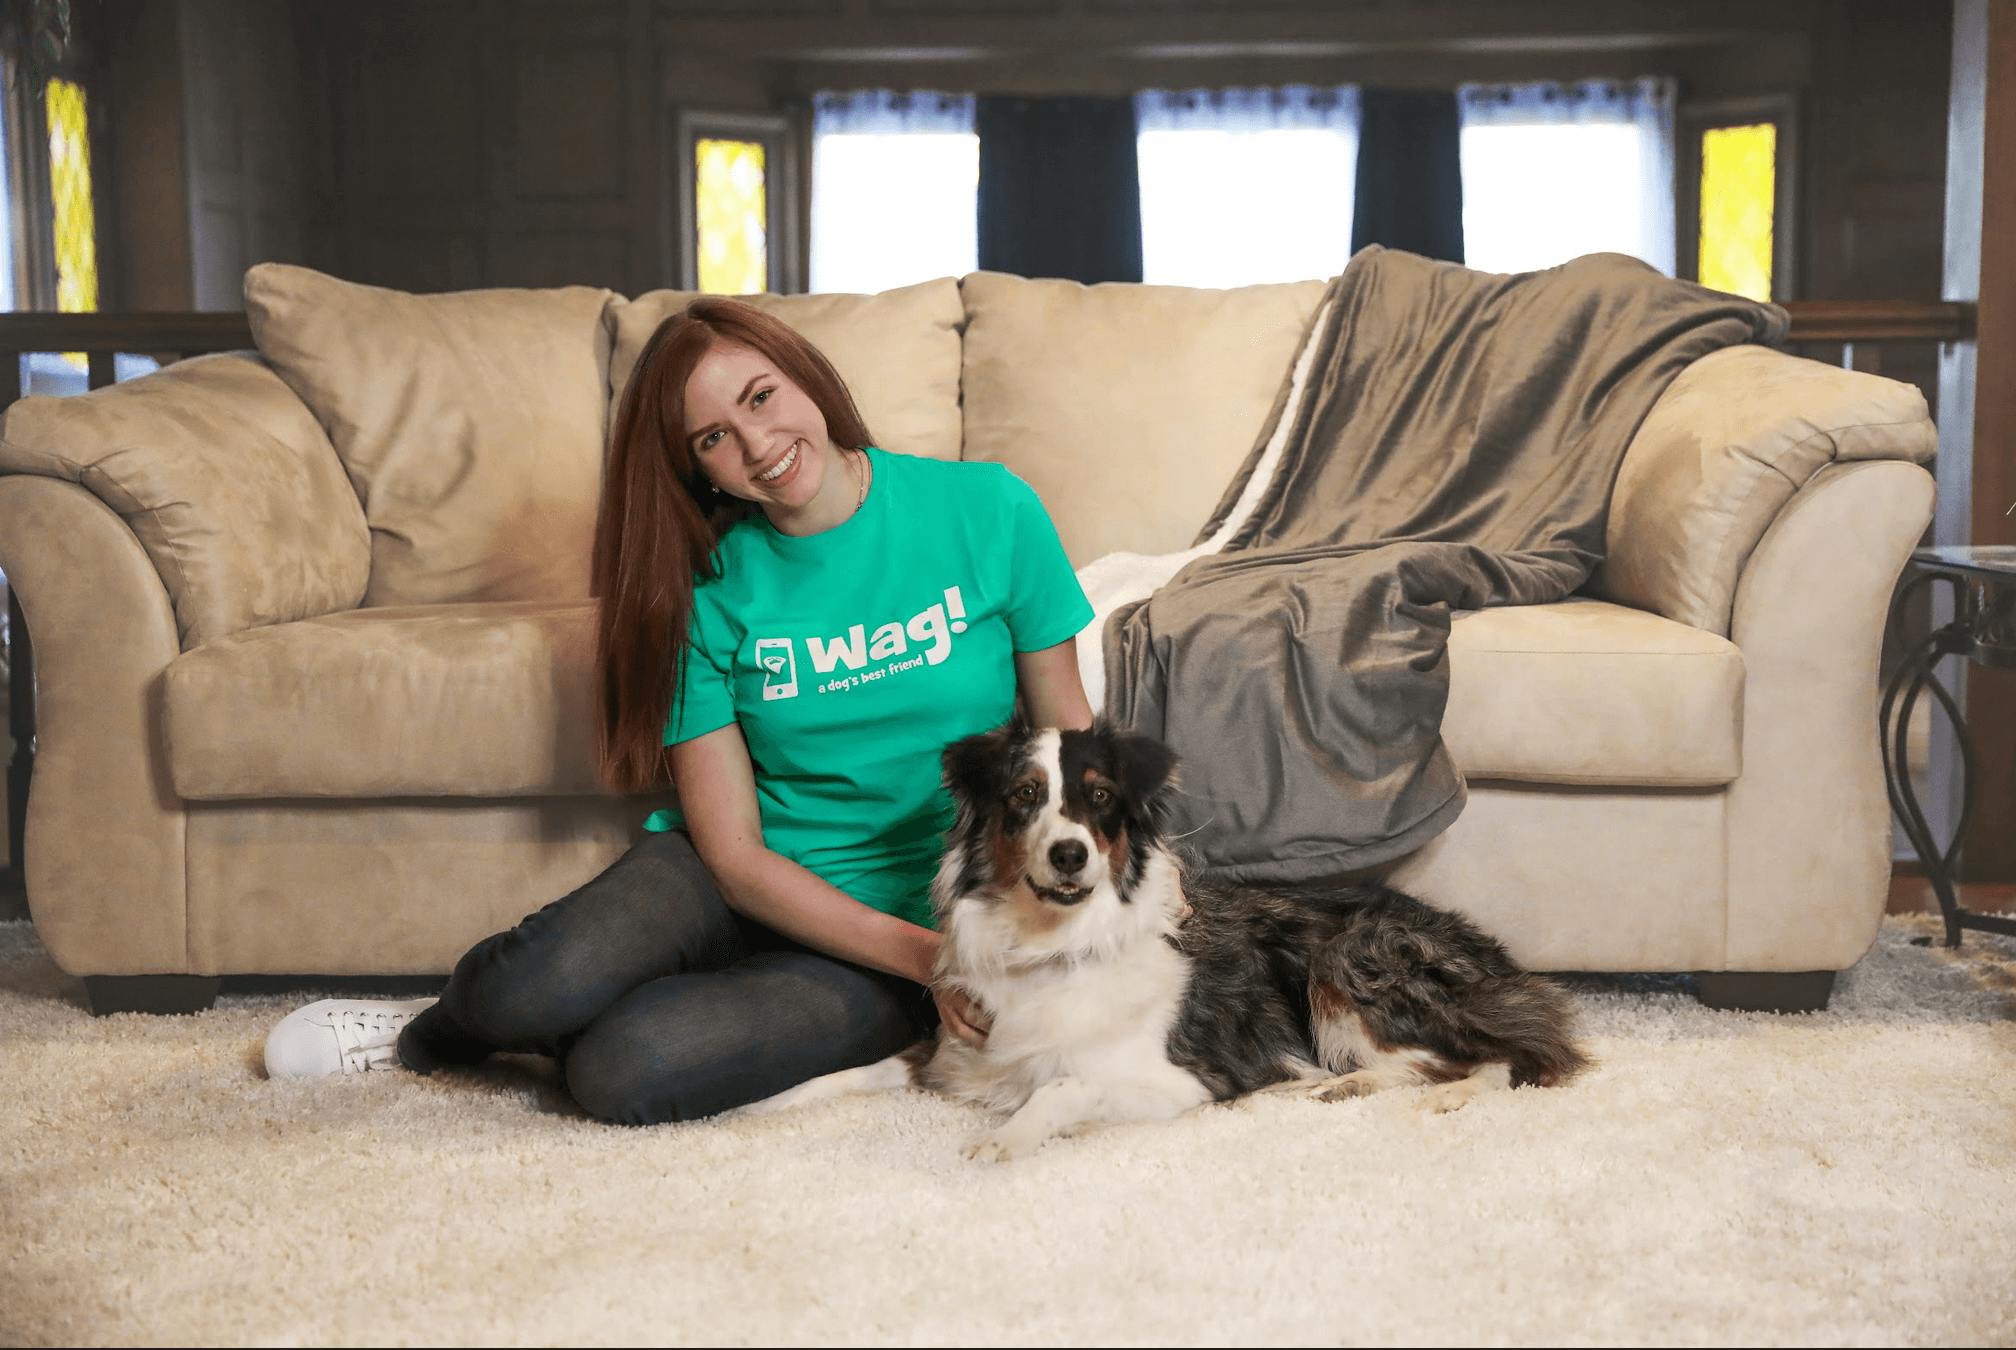 daily-wag-how-to-host-dog-boarding-in-your-home-with-other-pets-hero-image